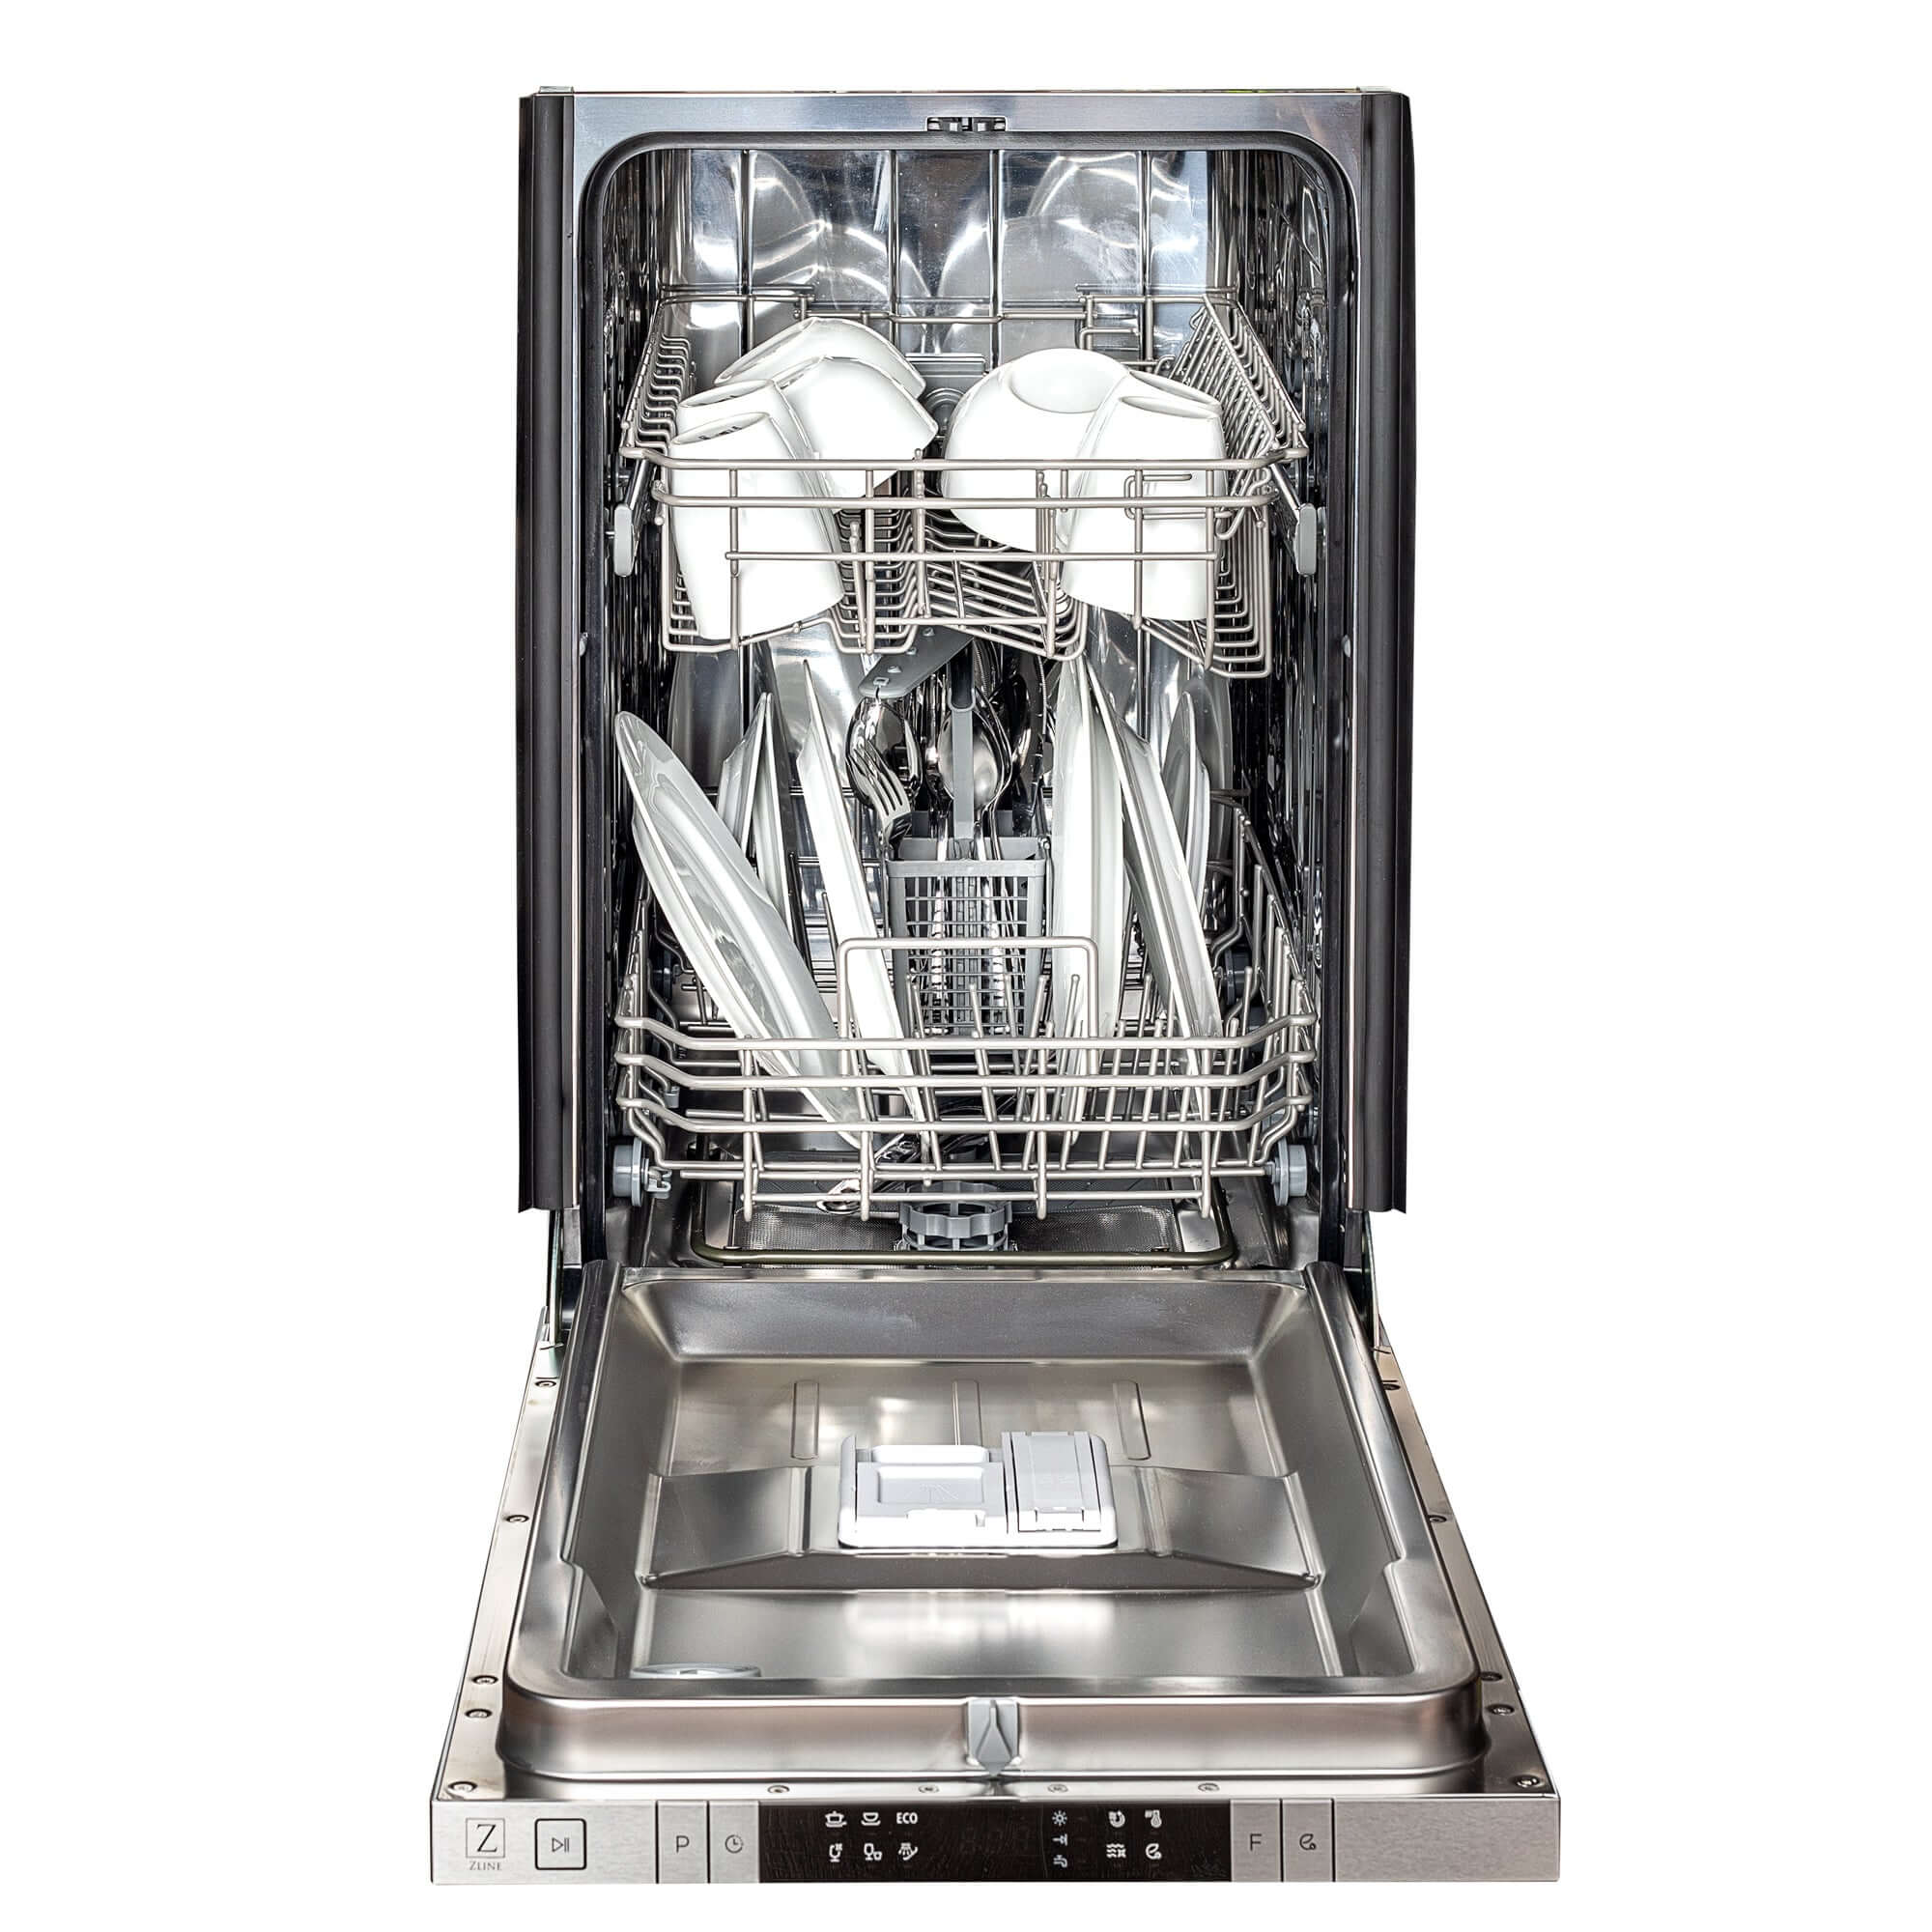 ZLINE 18 in. Compact Top Control Dishwasher with White Matte Panel and Modern Style Handle, 52 dBa (DW-WM-H-18)